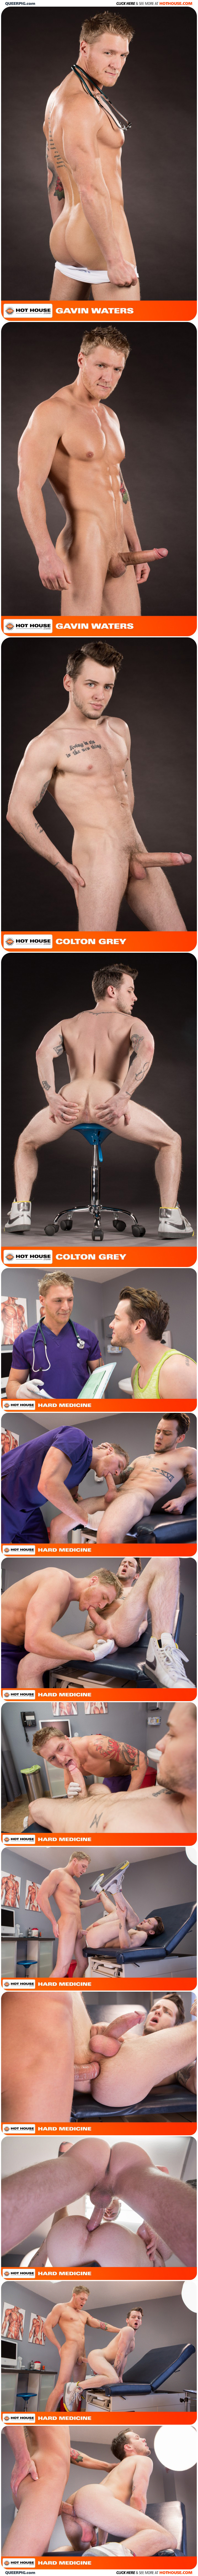 Hot House, Colton Grey, Gavin Waters